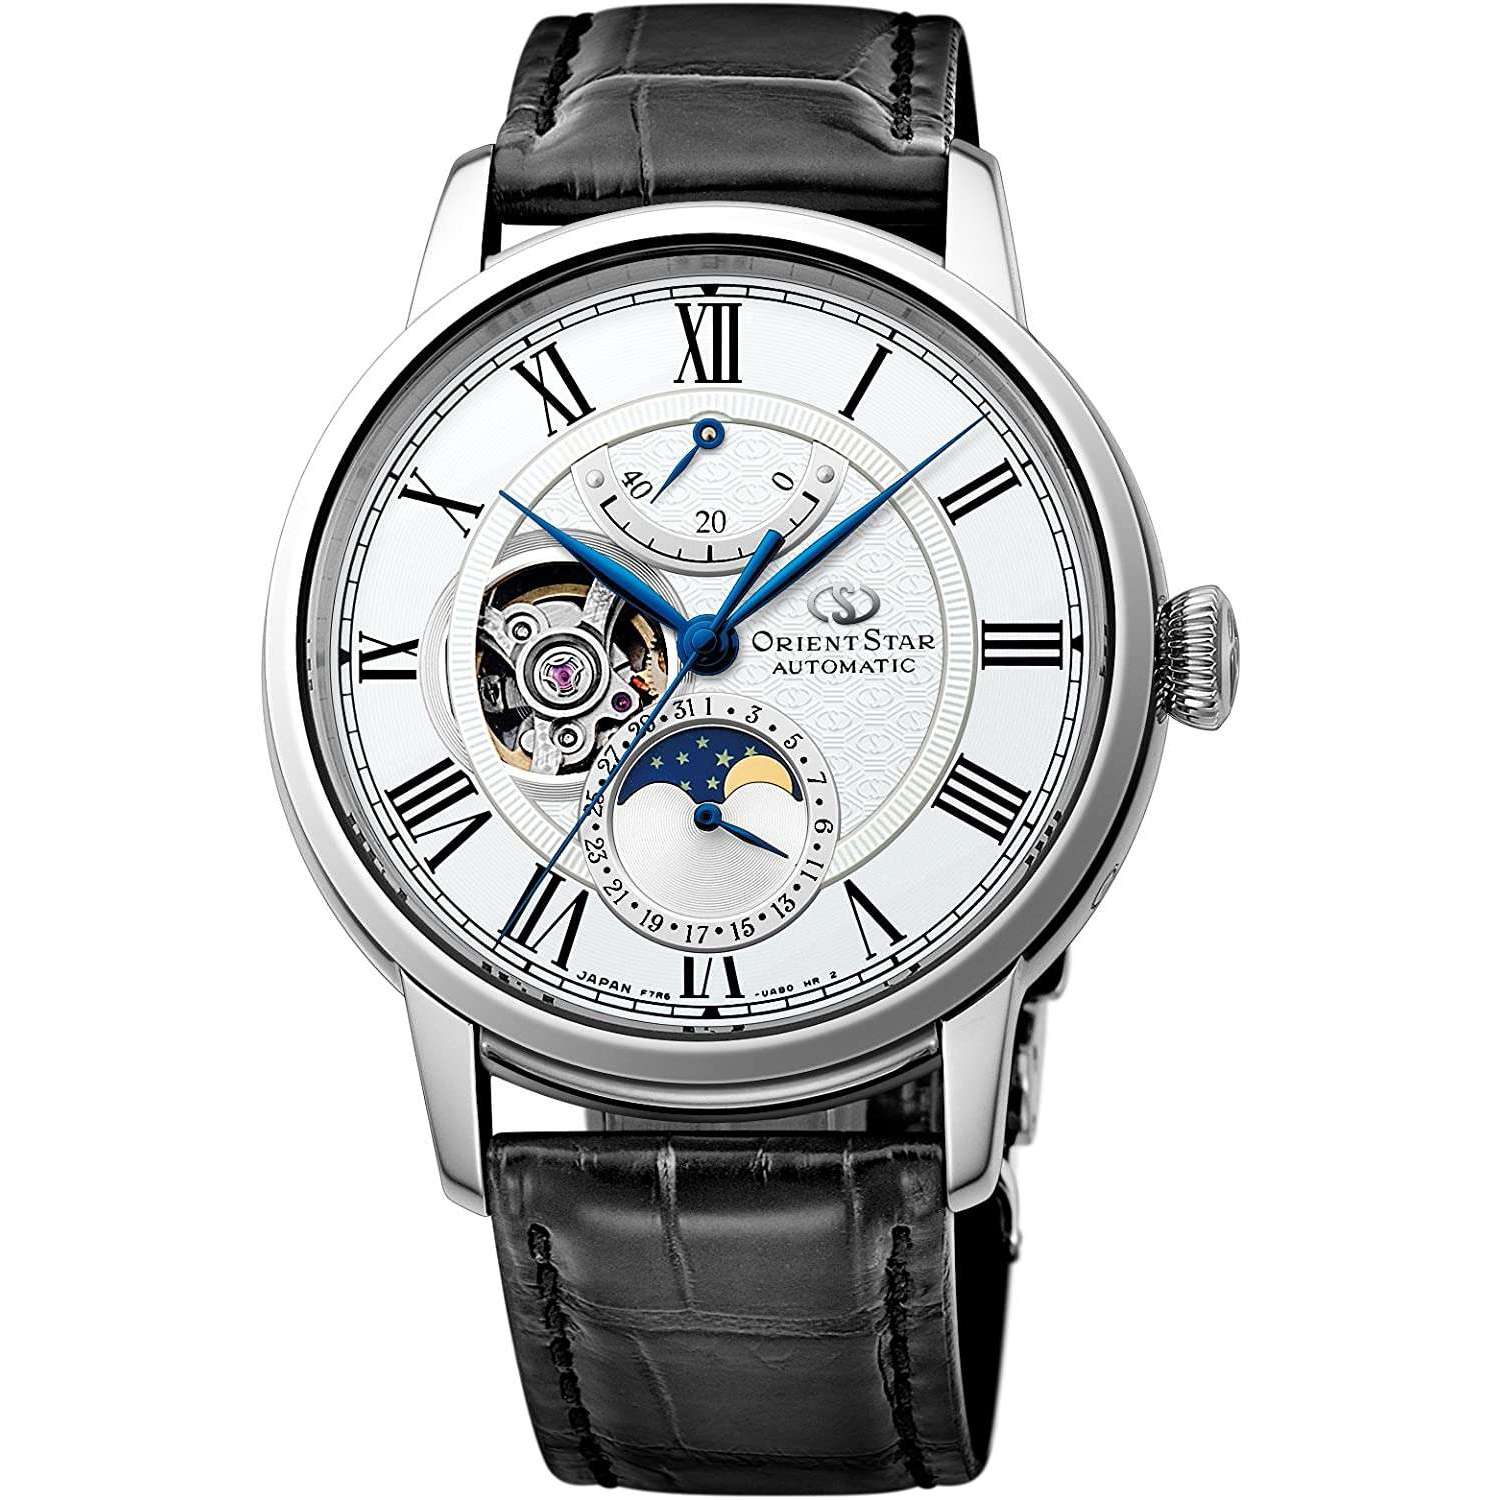 ROOK JAPAN:ORIENT STAR CLASSIC COLLECTION MECHANICAL MOON PHASE MEN WATCH RK-AM0001S,JDM Watch,Orient Star Mechanical Moon Phase